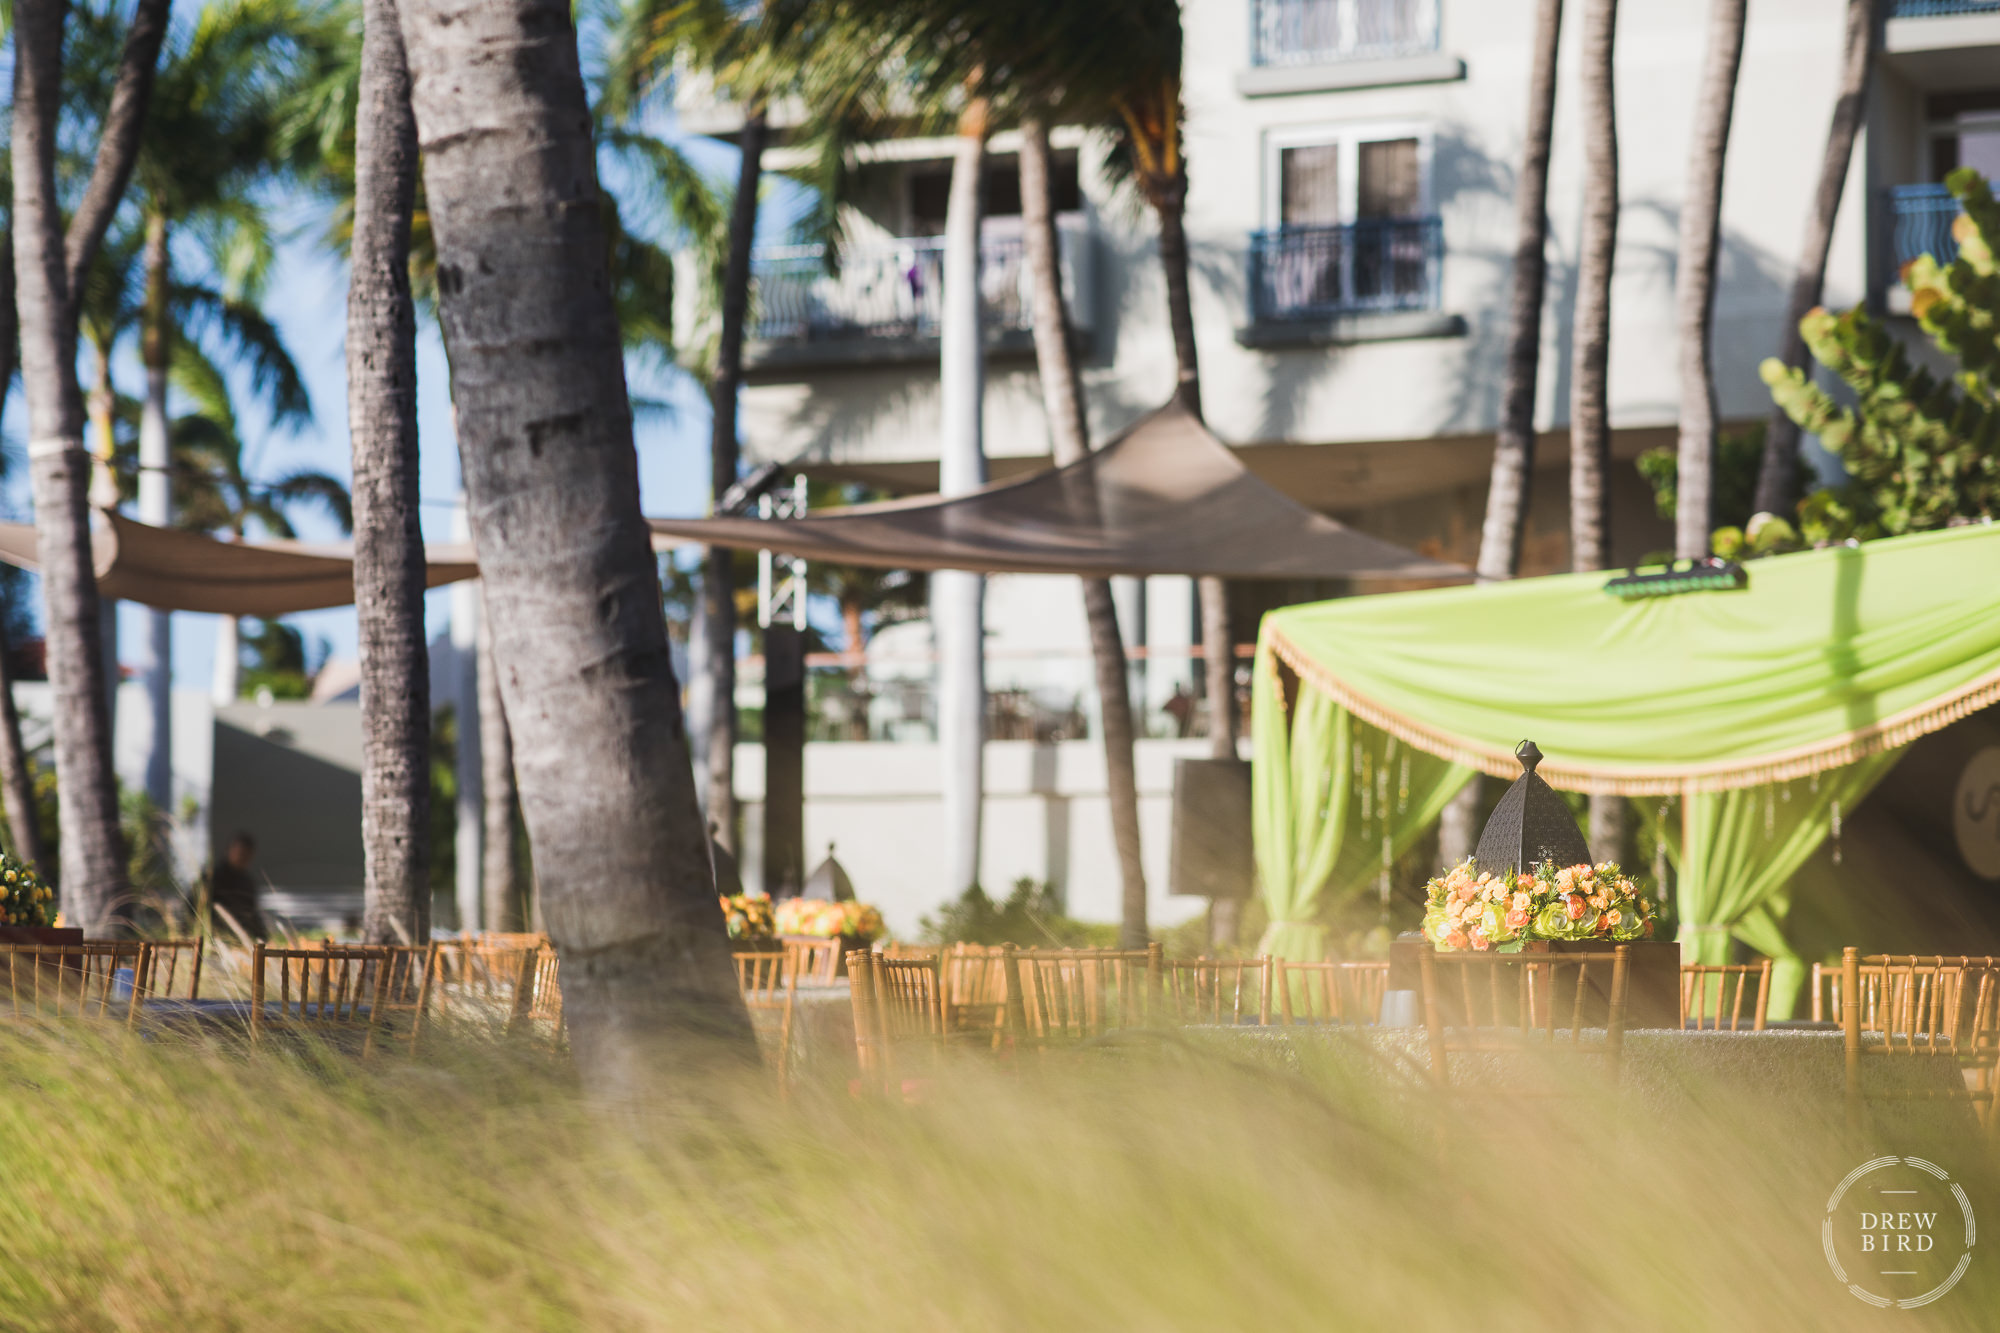 An artistic photograph showing welcome party tents and decor through long native grasses for an Indian and Hindu destination wedding photography story at the Hilton Aruba Resort on the Caribbean island of Aruba.